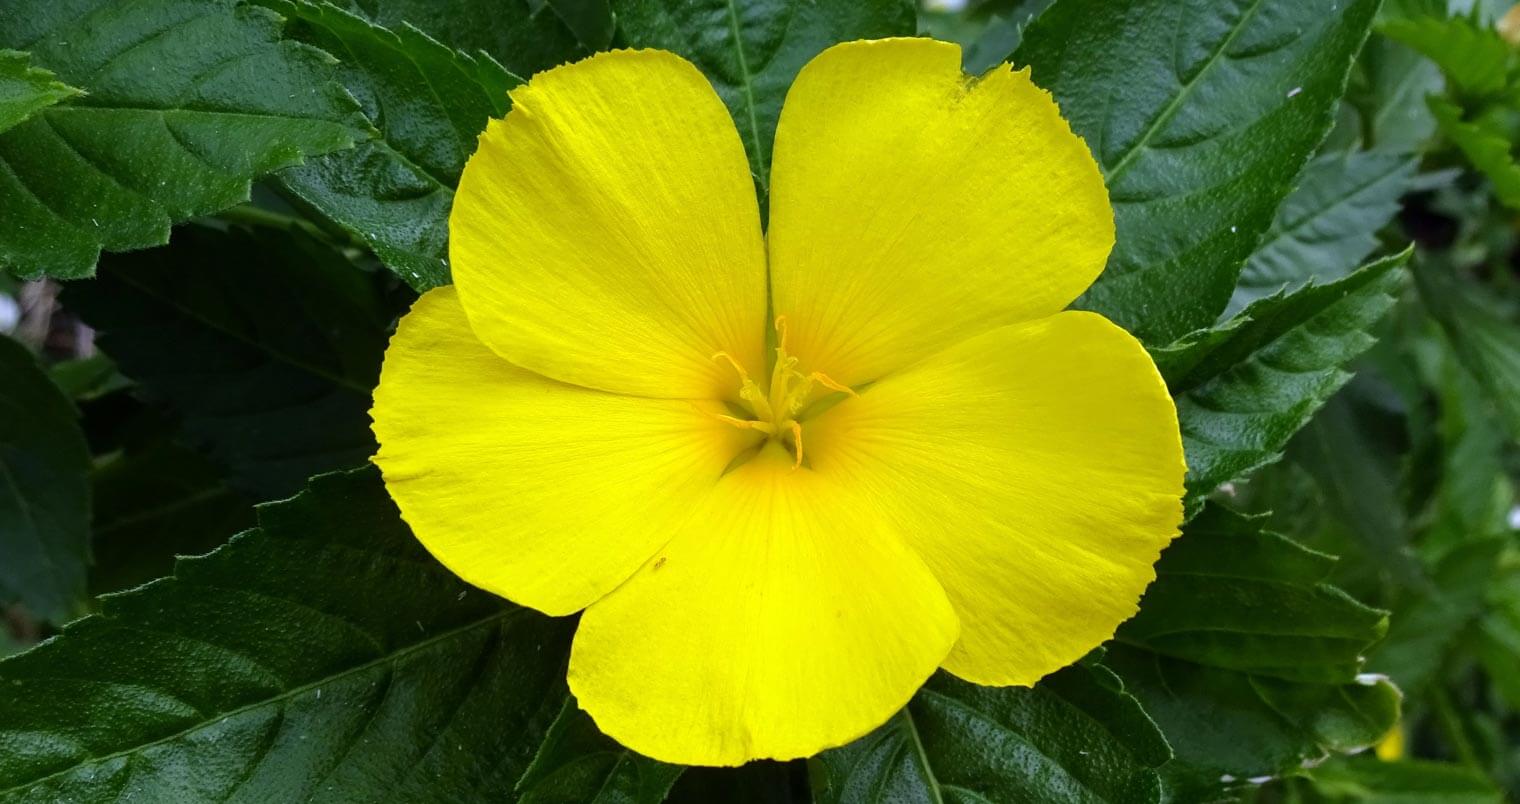 Damiana Plantm flower, featured image